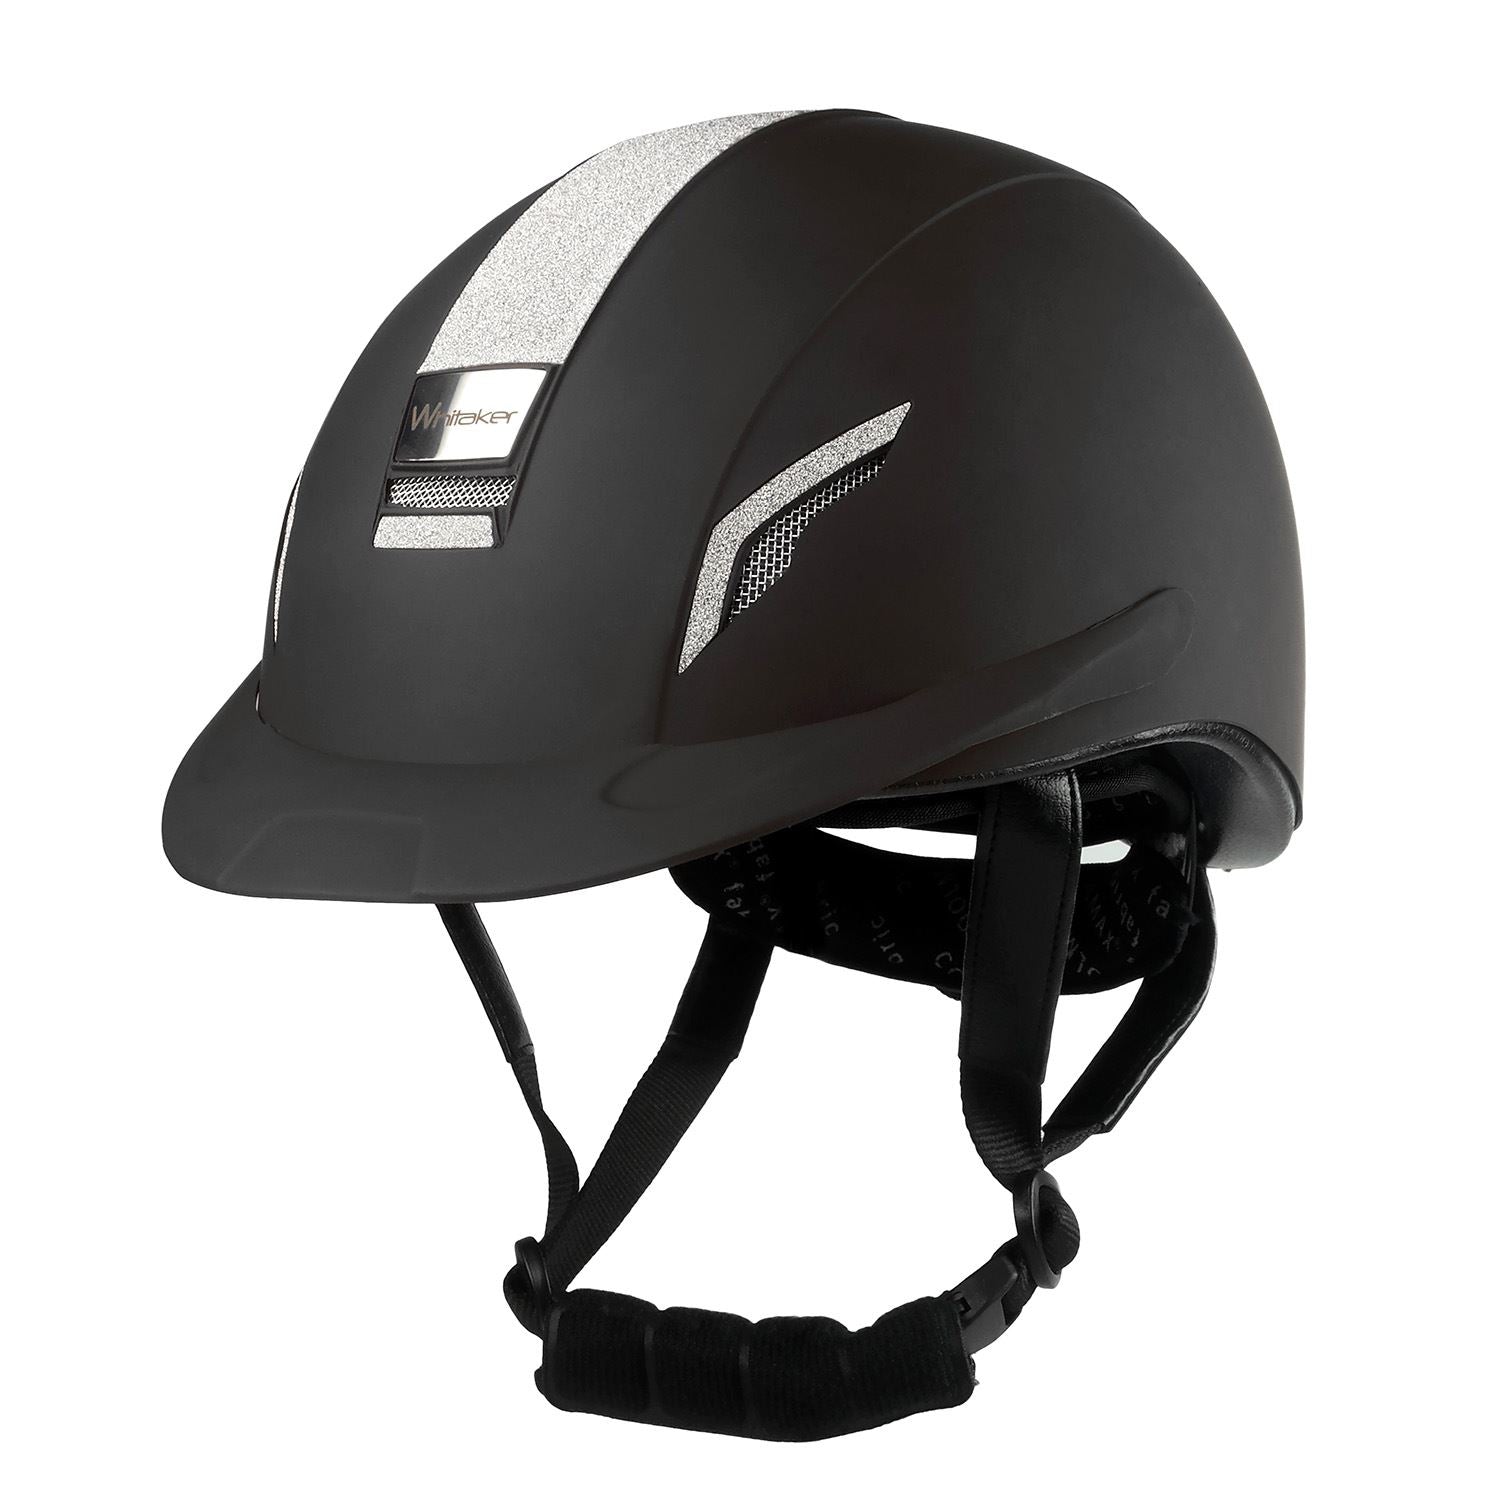 Whitaker Vx2 Sparkly Riding Helmet - Just Horse Riders